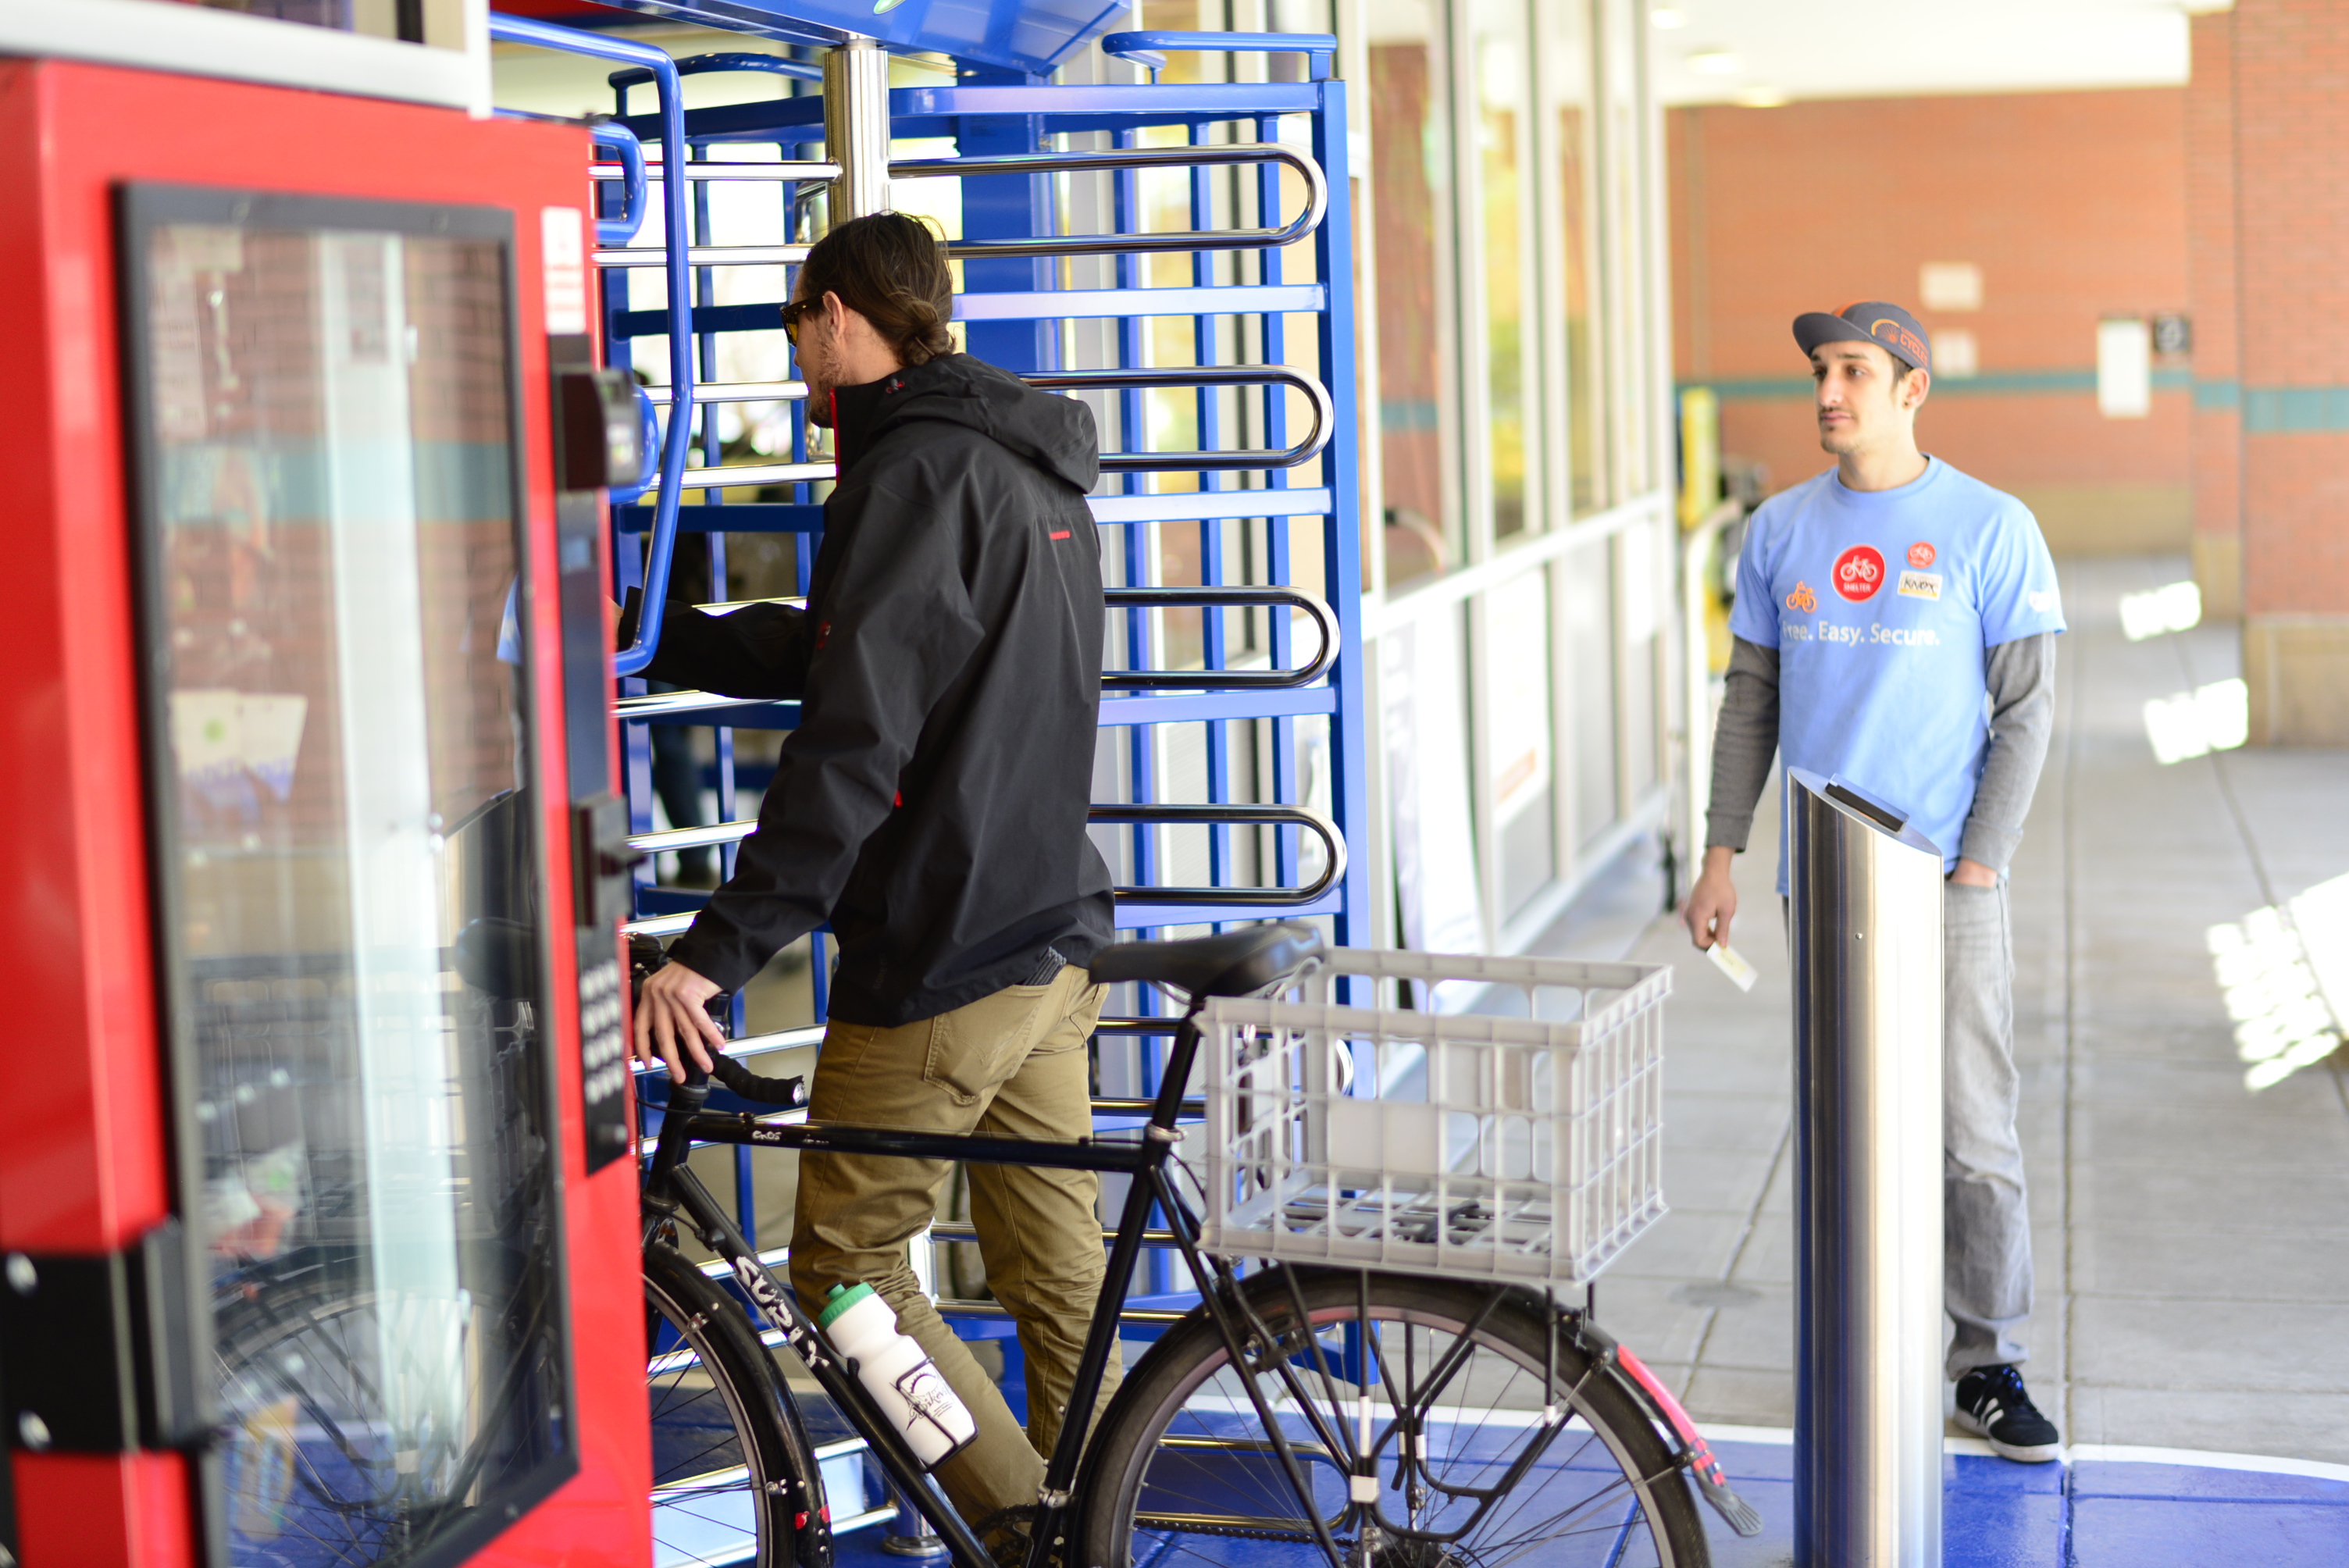 Bicycle cages with specialized turnstiles for increased security, Boulder (credit: Natalie Stiffler)